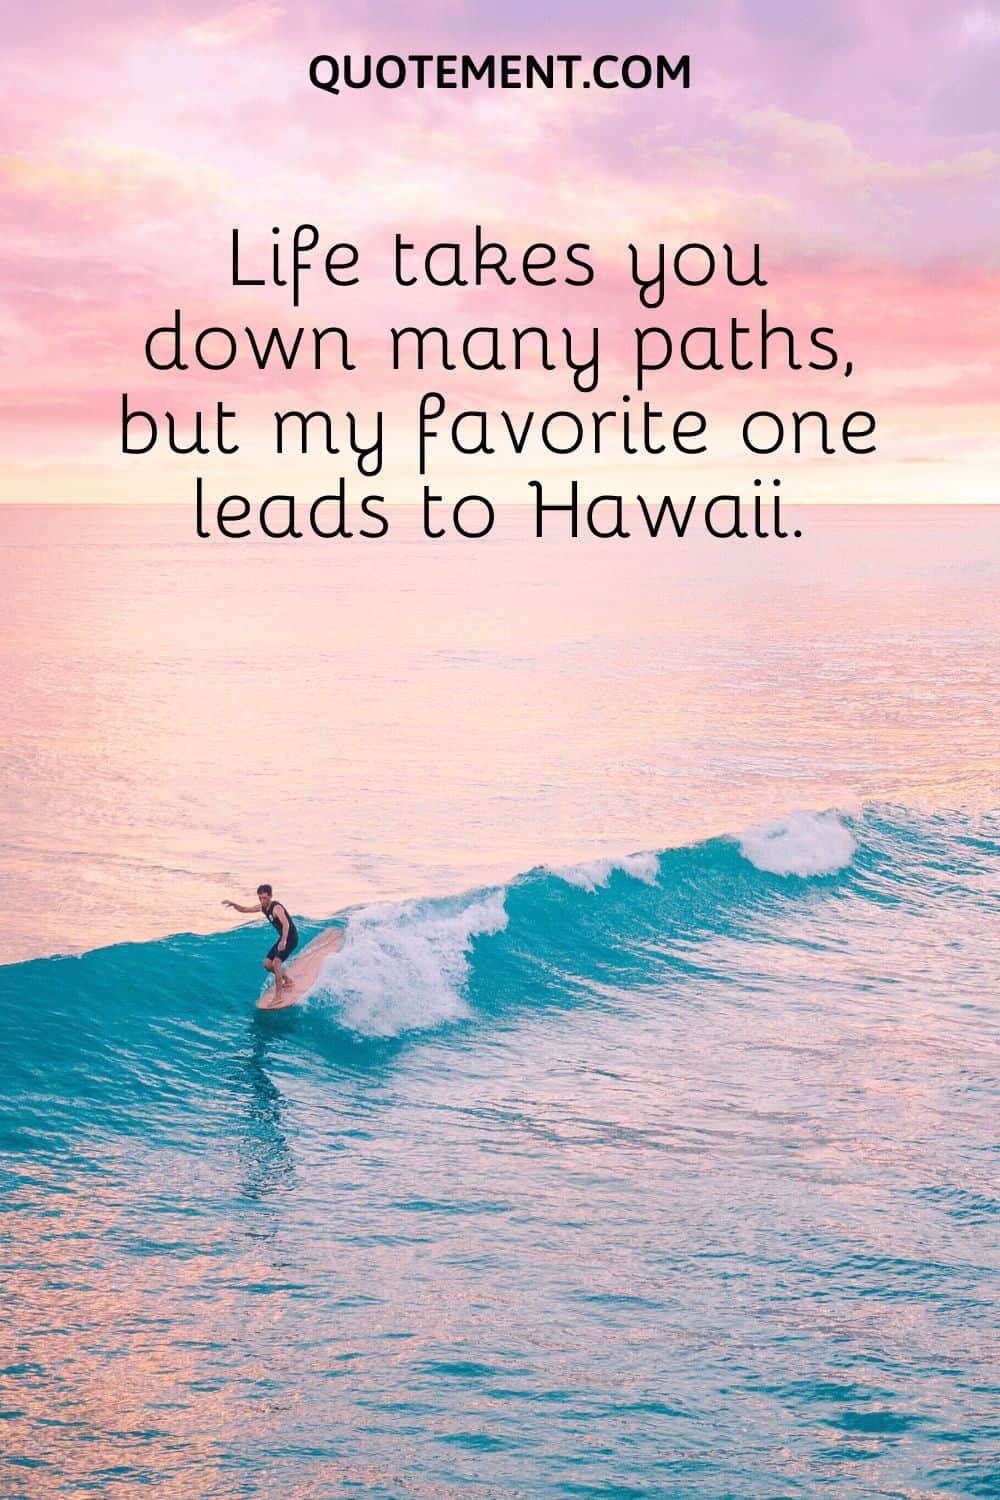 Life takes you down many paths, but my favorite one leads to Hawaii.